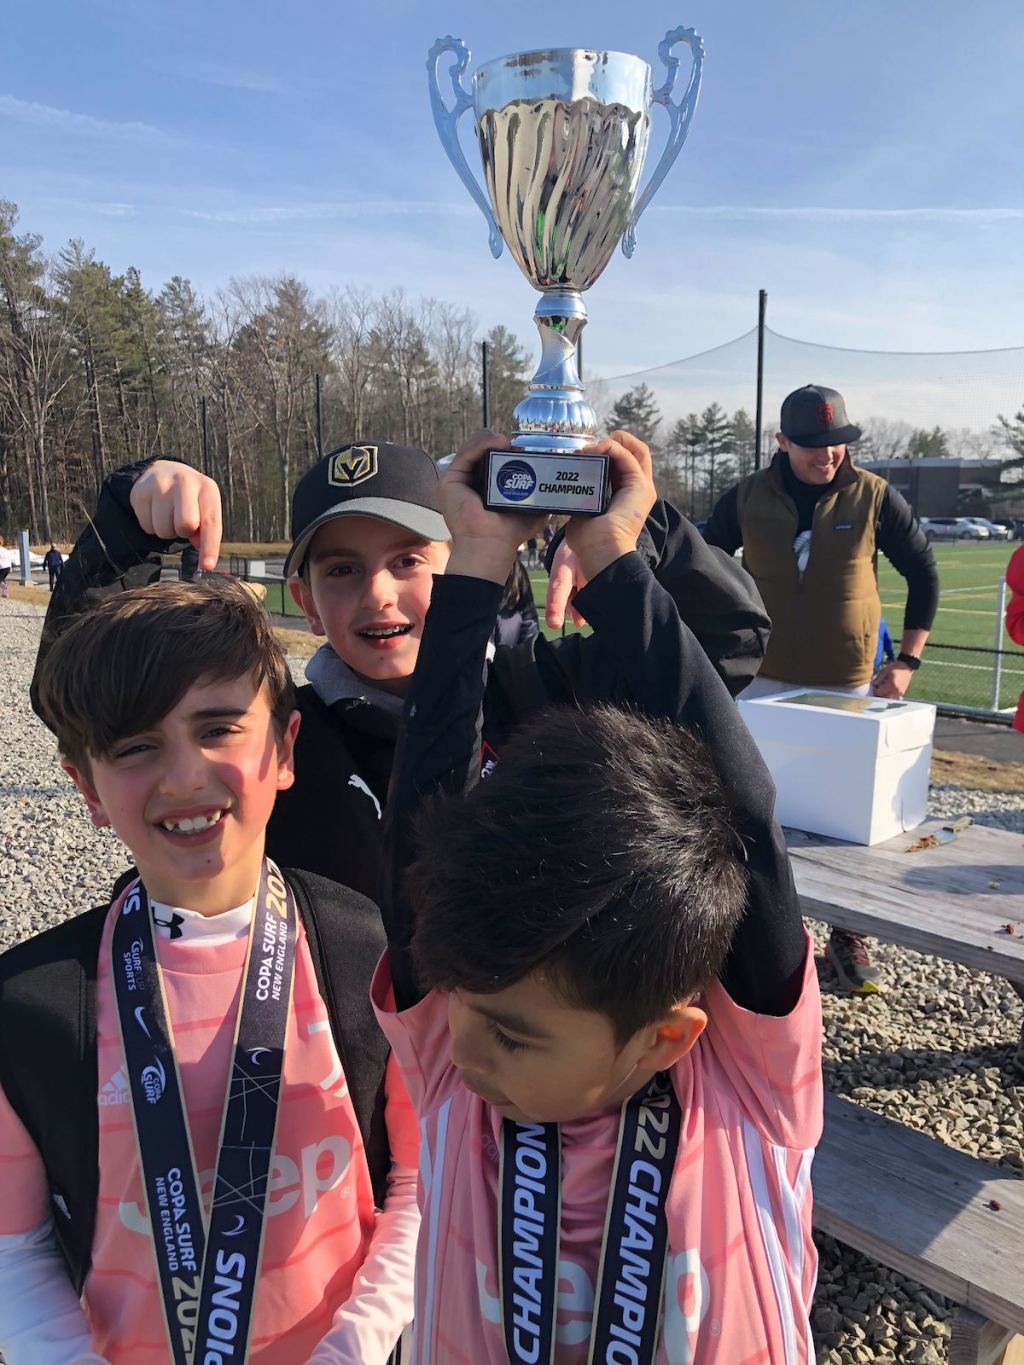 three boys holding medals and soccer trophy smiling outside